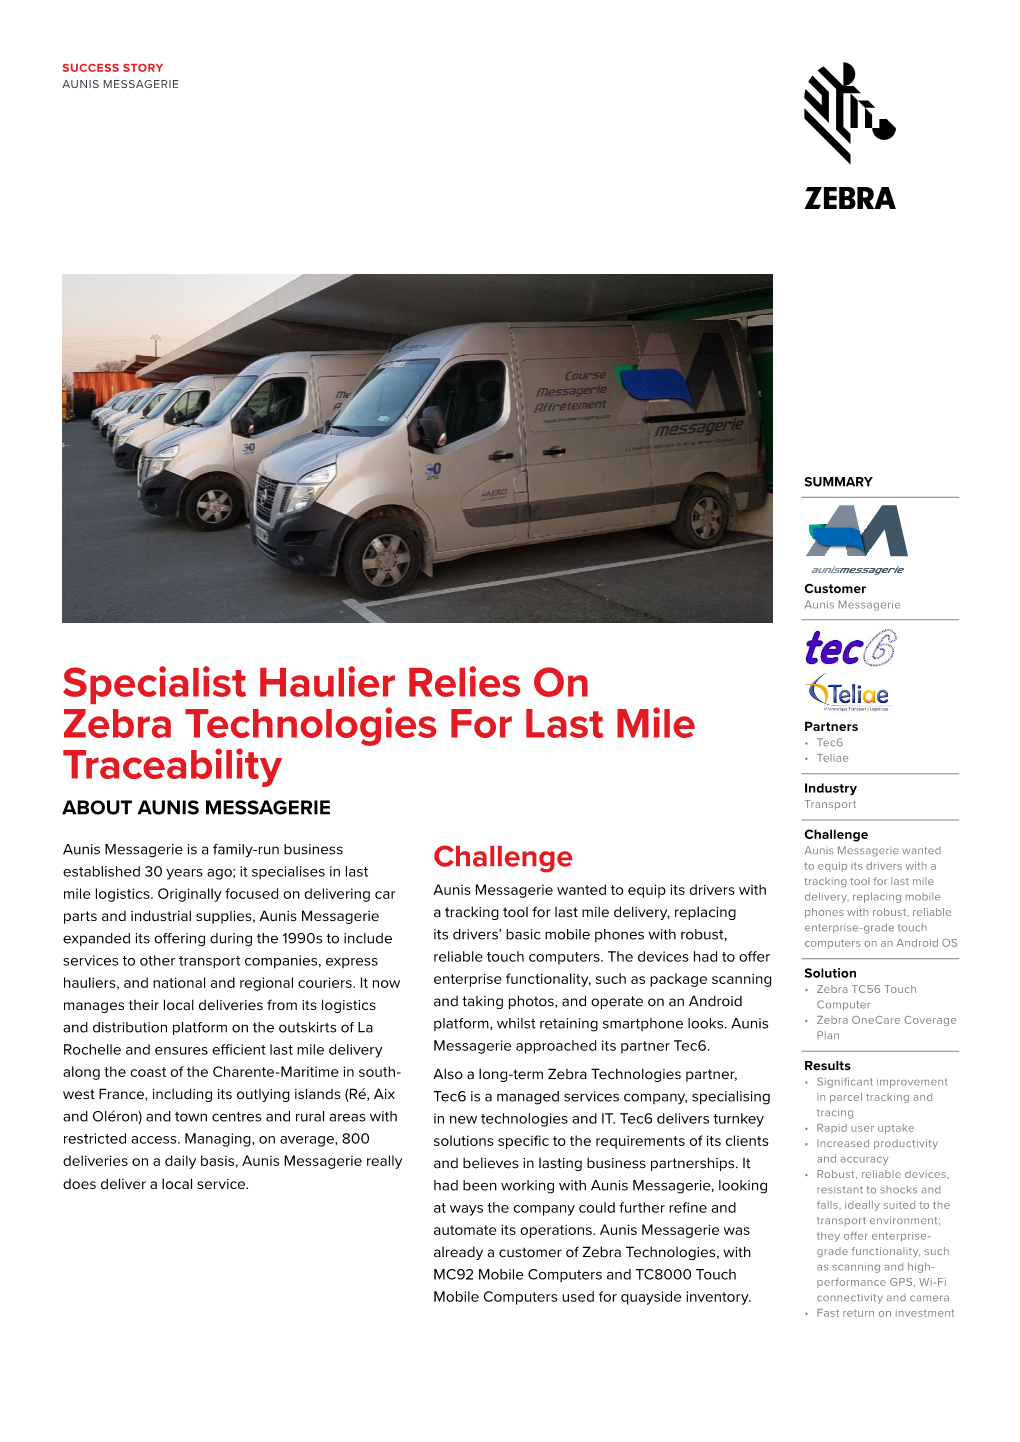 Specialist Haulier Relies on Zebra Technologies for the Last Mile